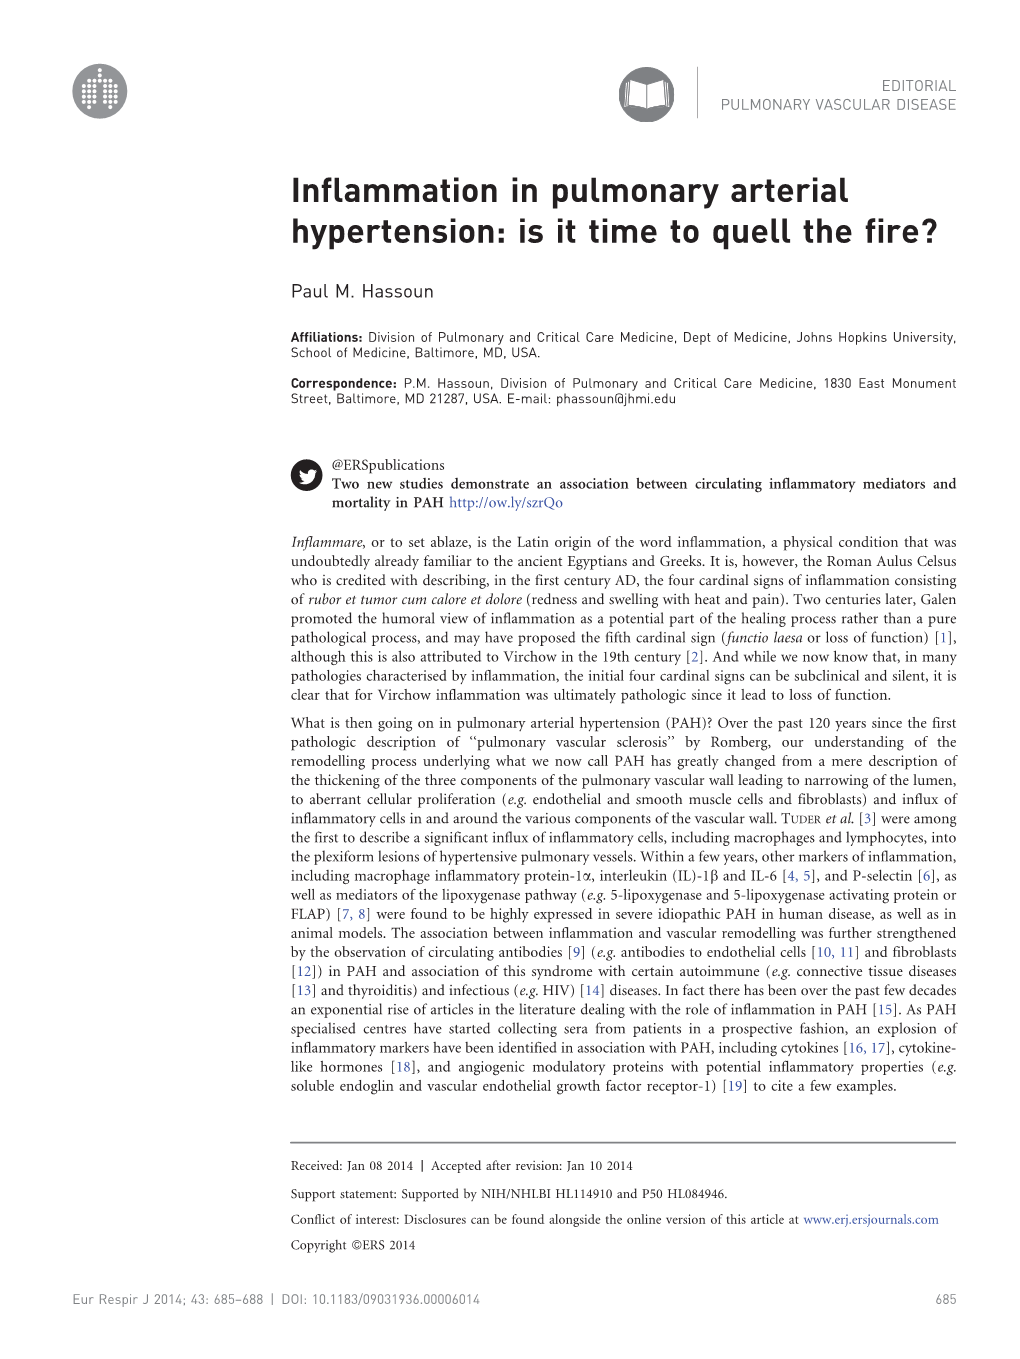 Inflammation in Pulmonary Arterial Hypertension: Is It Time to Quell the Fire?